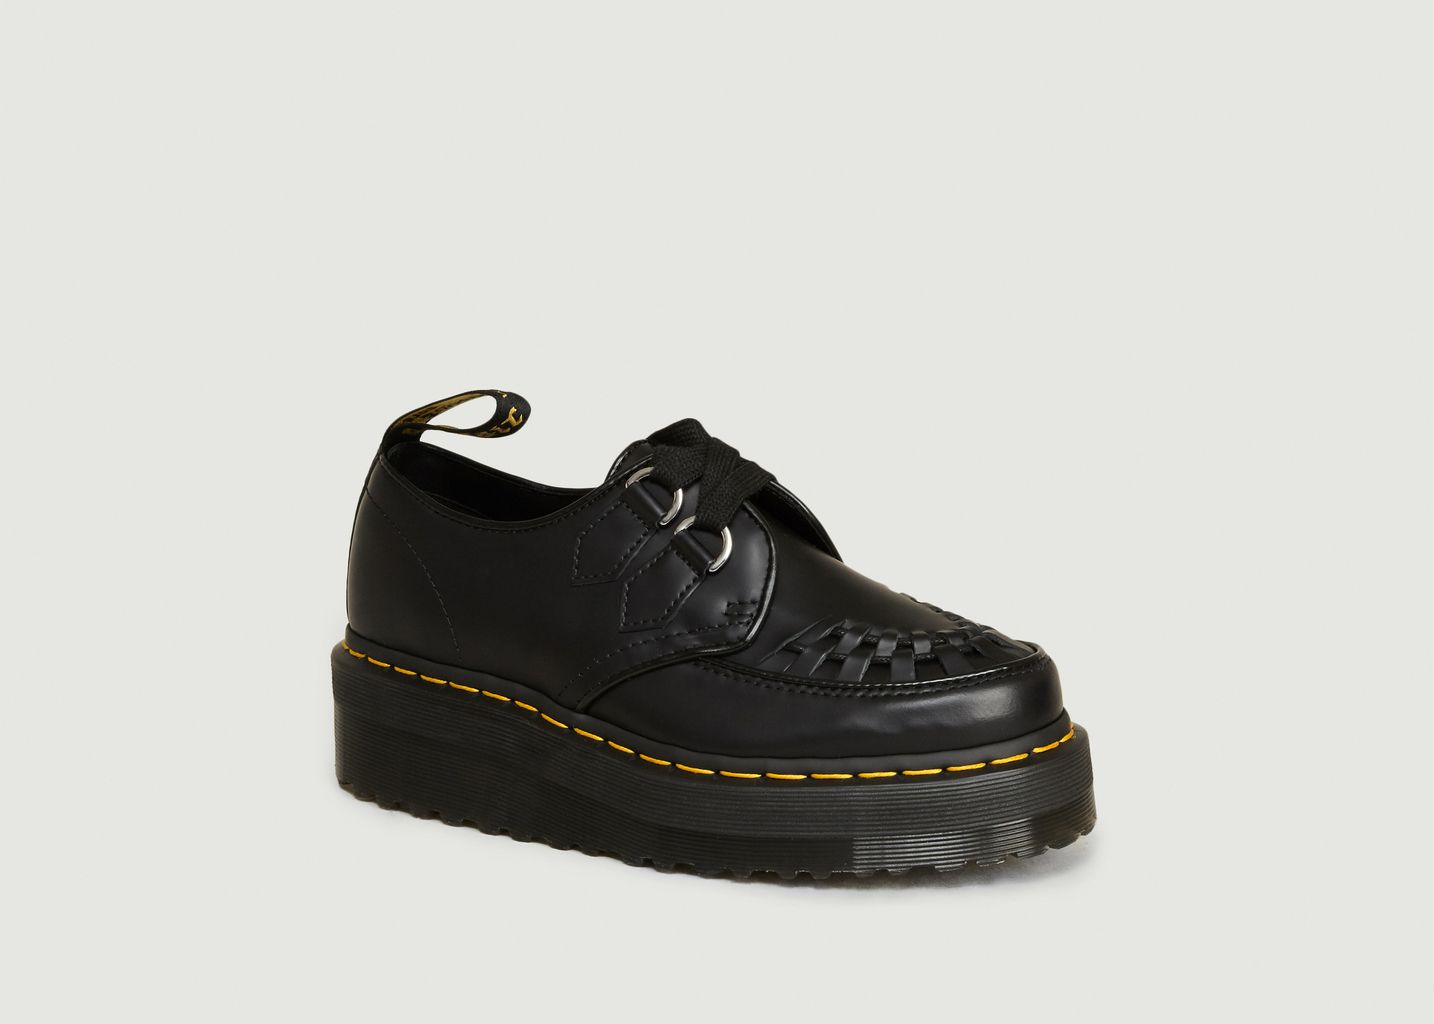 creepers shoes doc martens